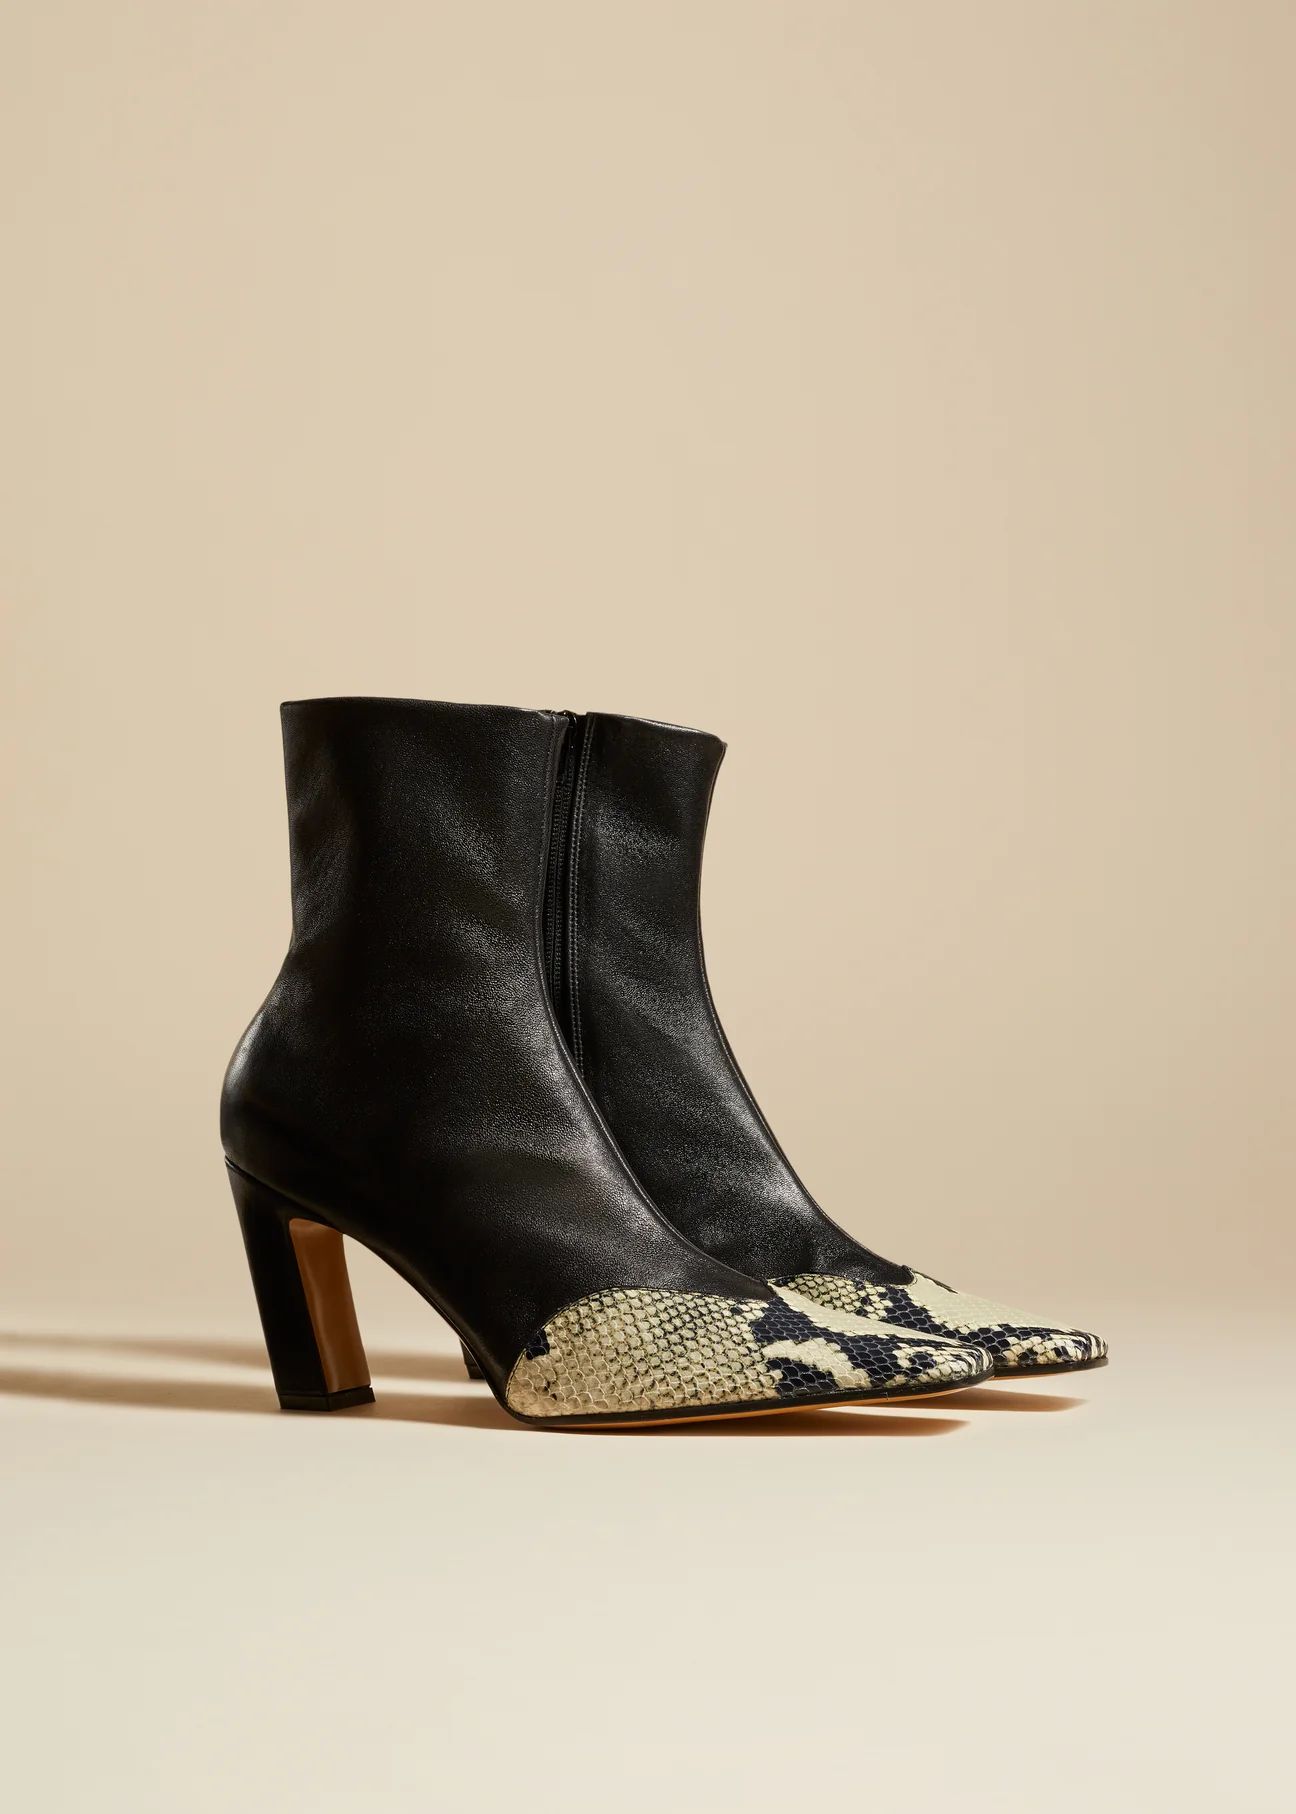 The Dallas Stretch Ankle Boot in Black with Natural Python-Embossed Leather | Khaite